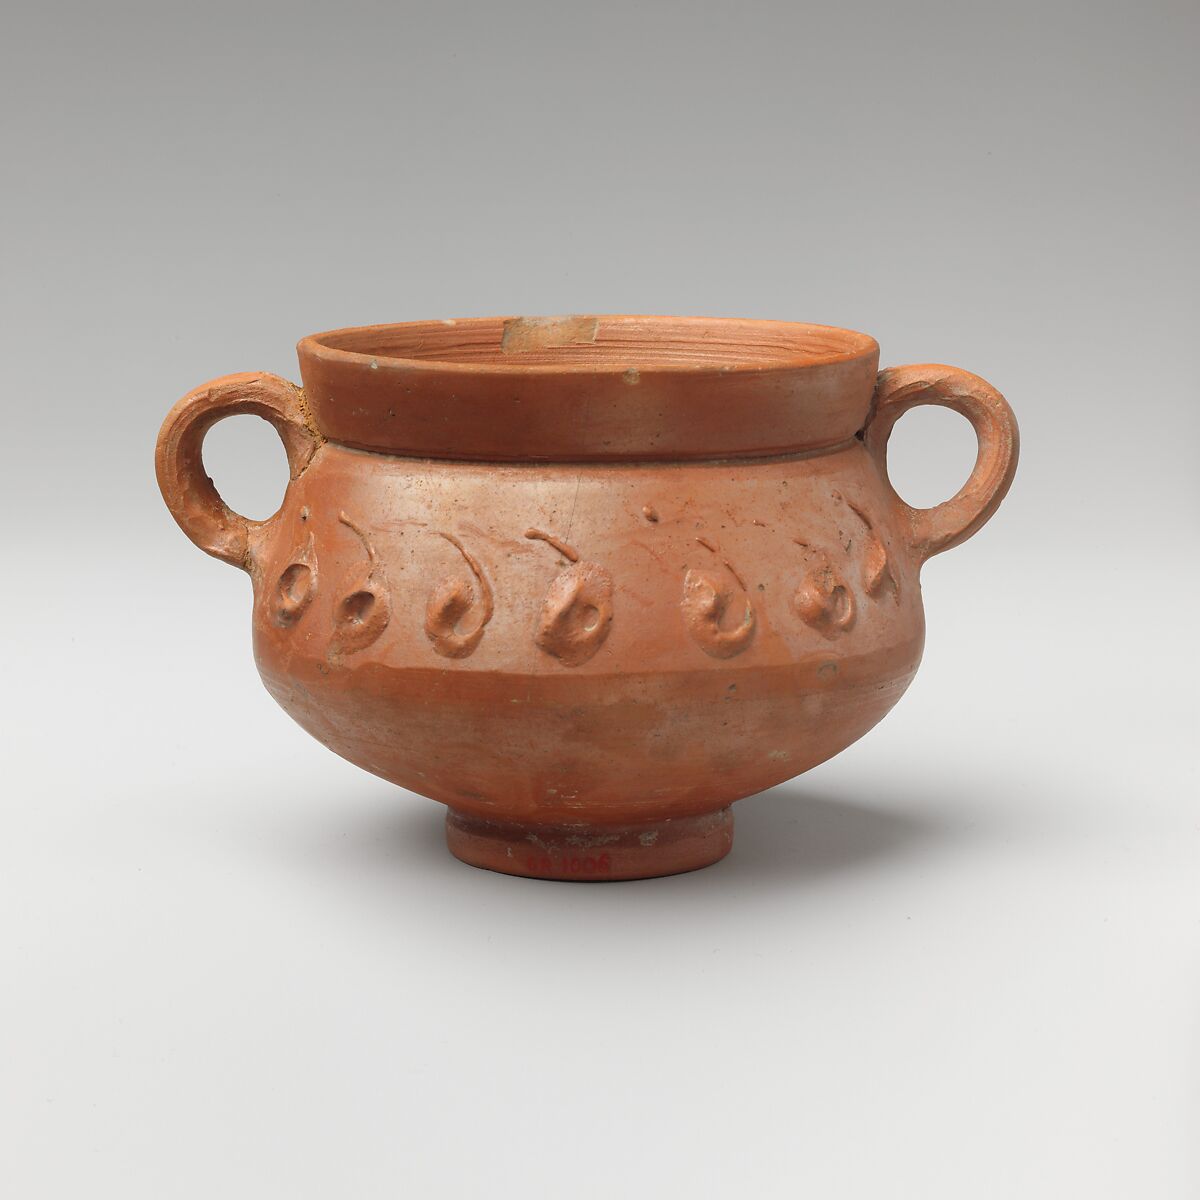 Terracotta cup with barbotine decoration, Terracotta, Roman 